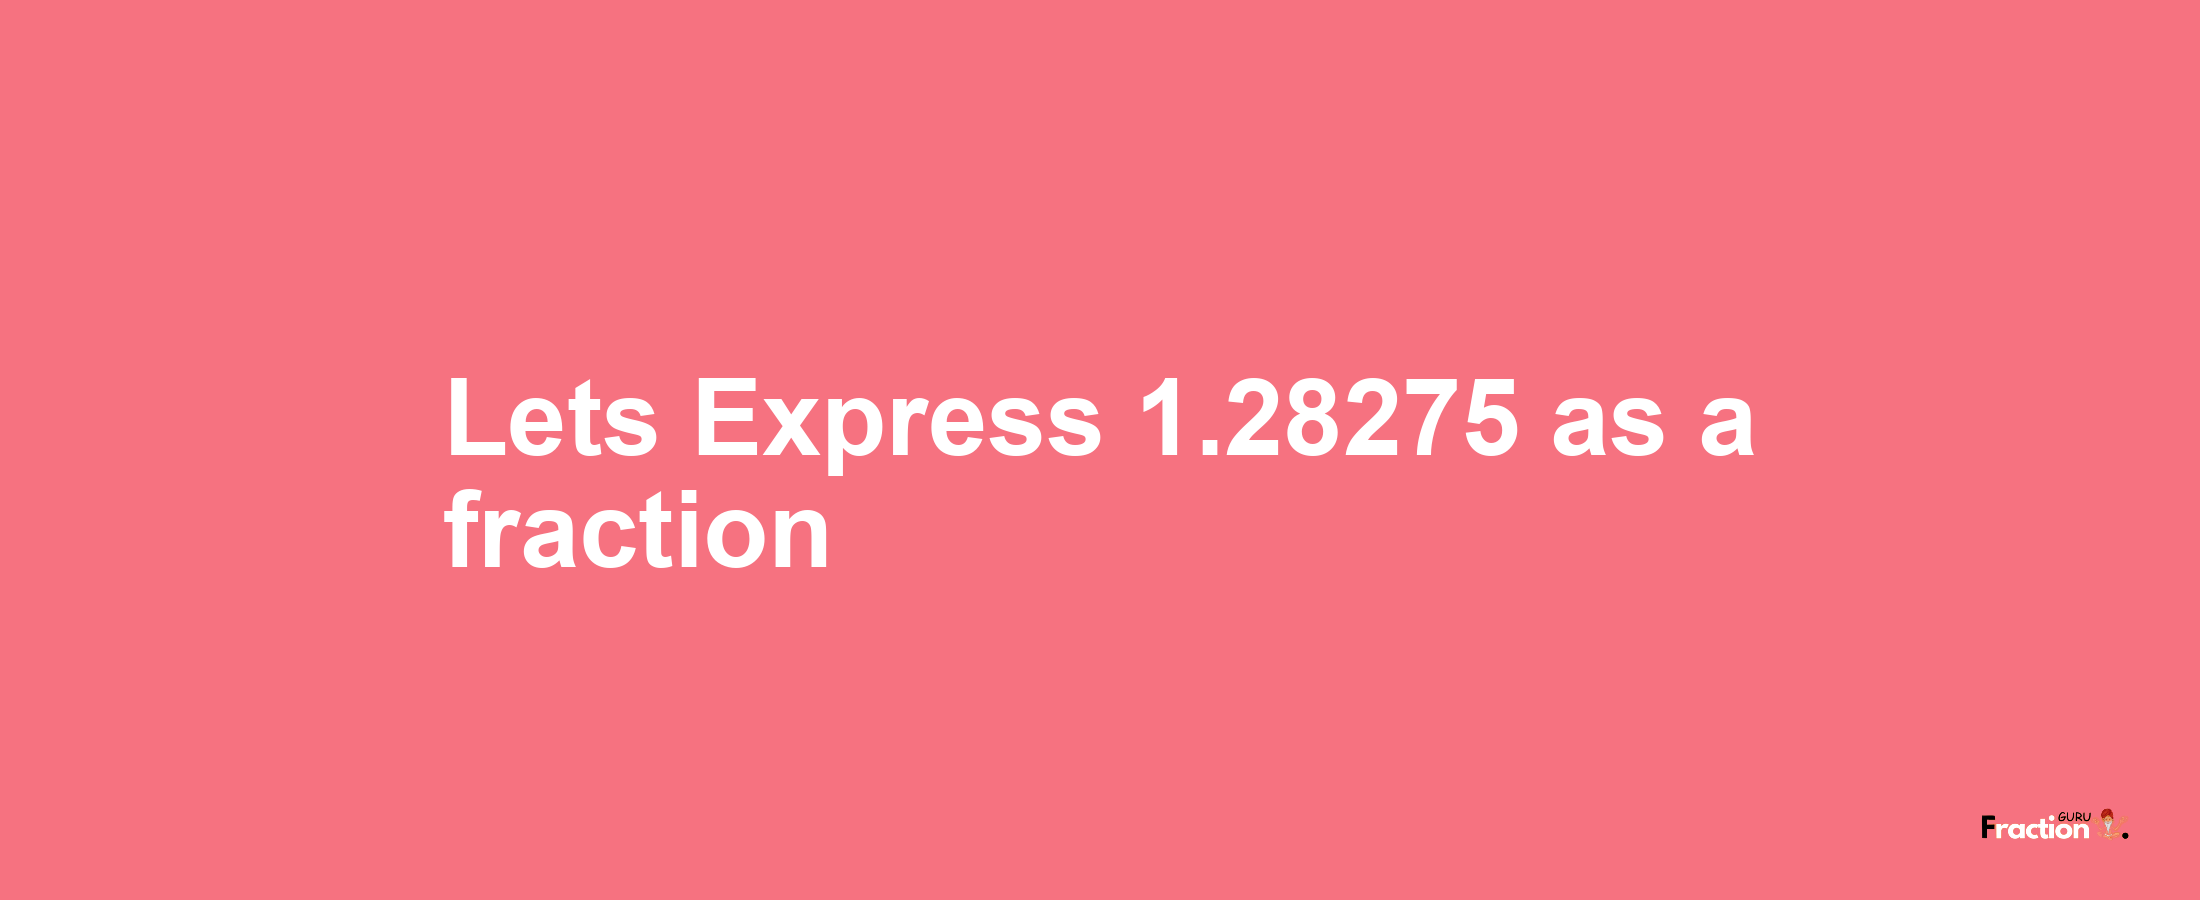 Lets Express 1.28275 as afraction